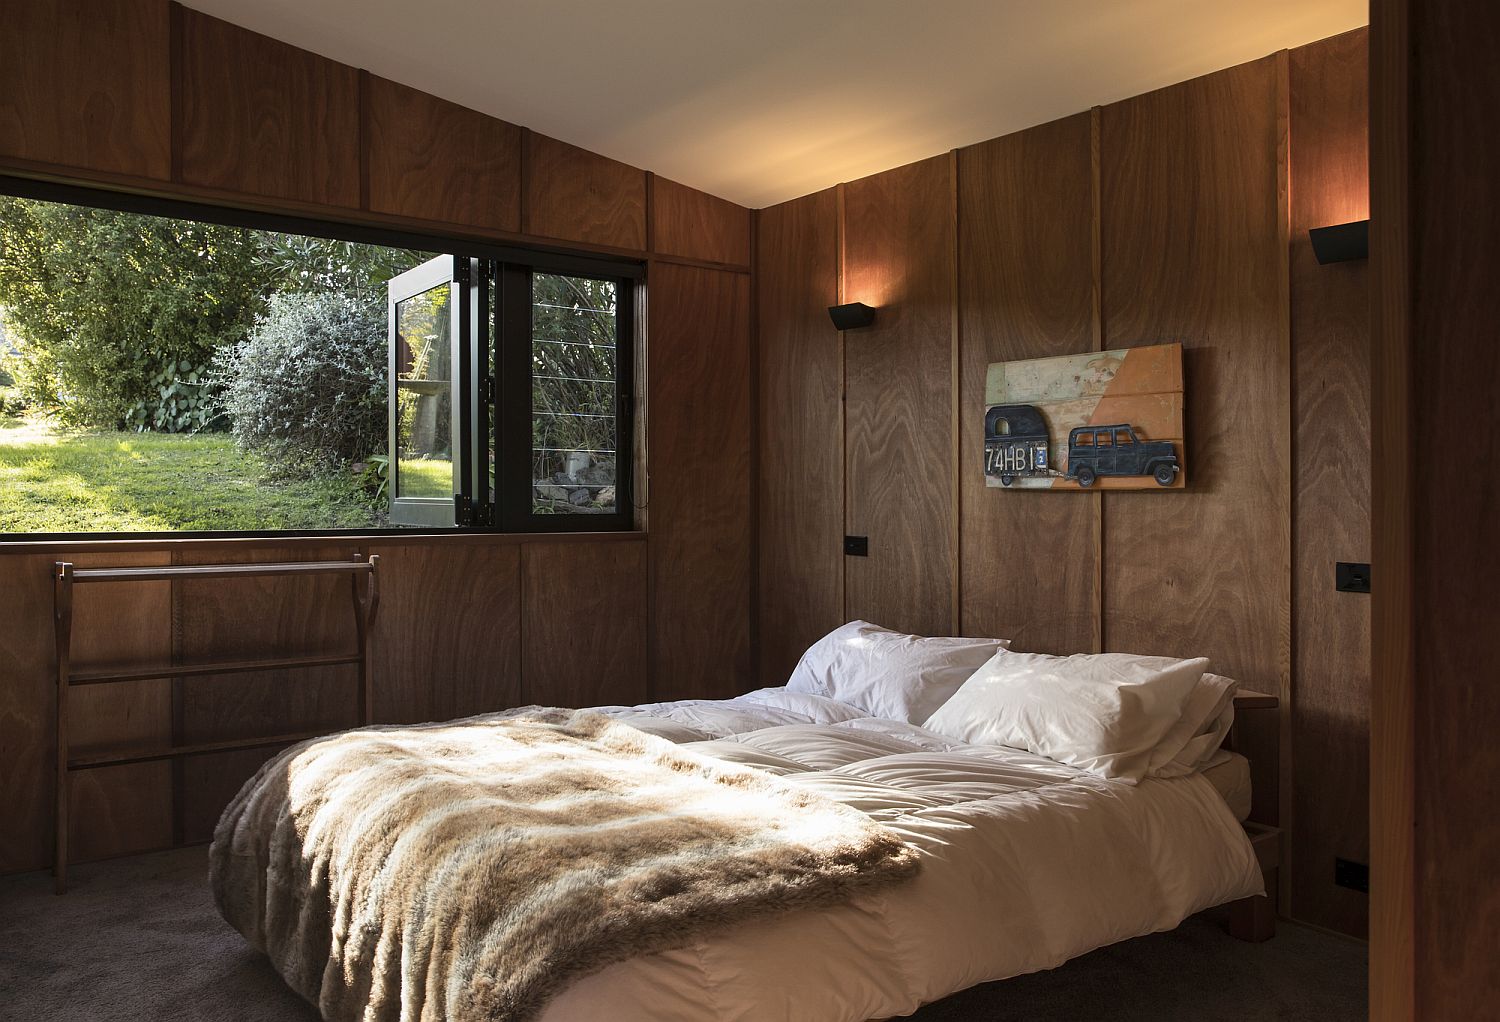 Window brings the outdoors into the bedroom